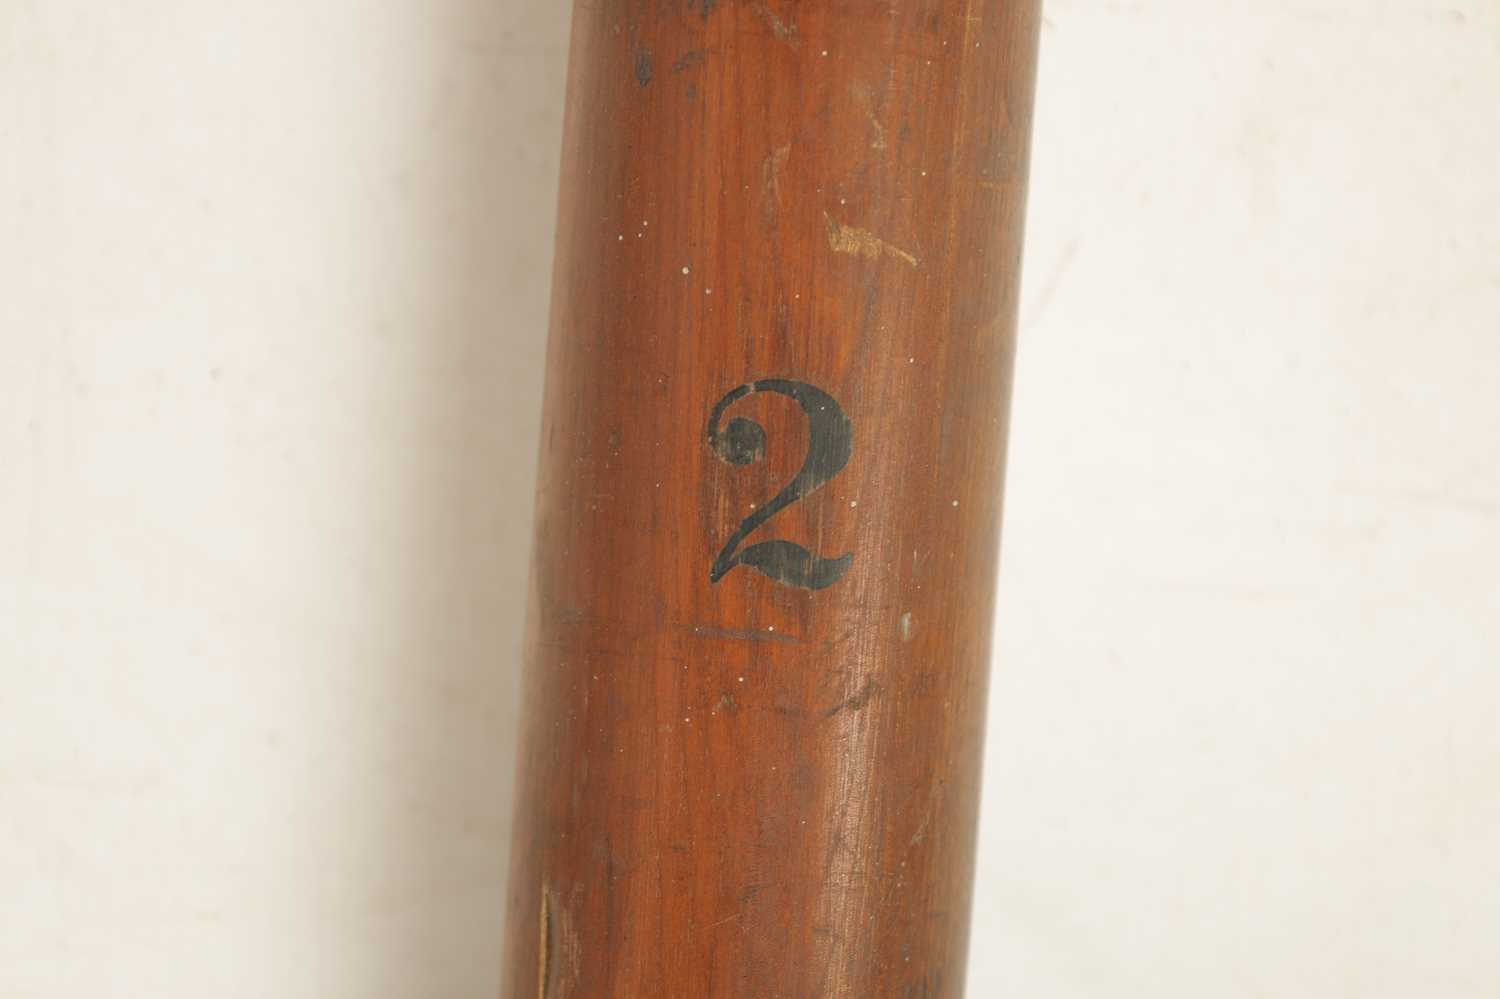 A GOOD PAIR OF PRESENTATIONS OXFORD UNIVERSITY ROWING OARS DATED 1900. - Image 8 of 14